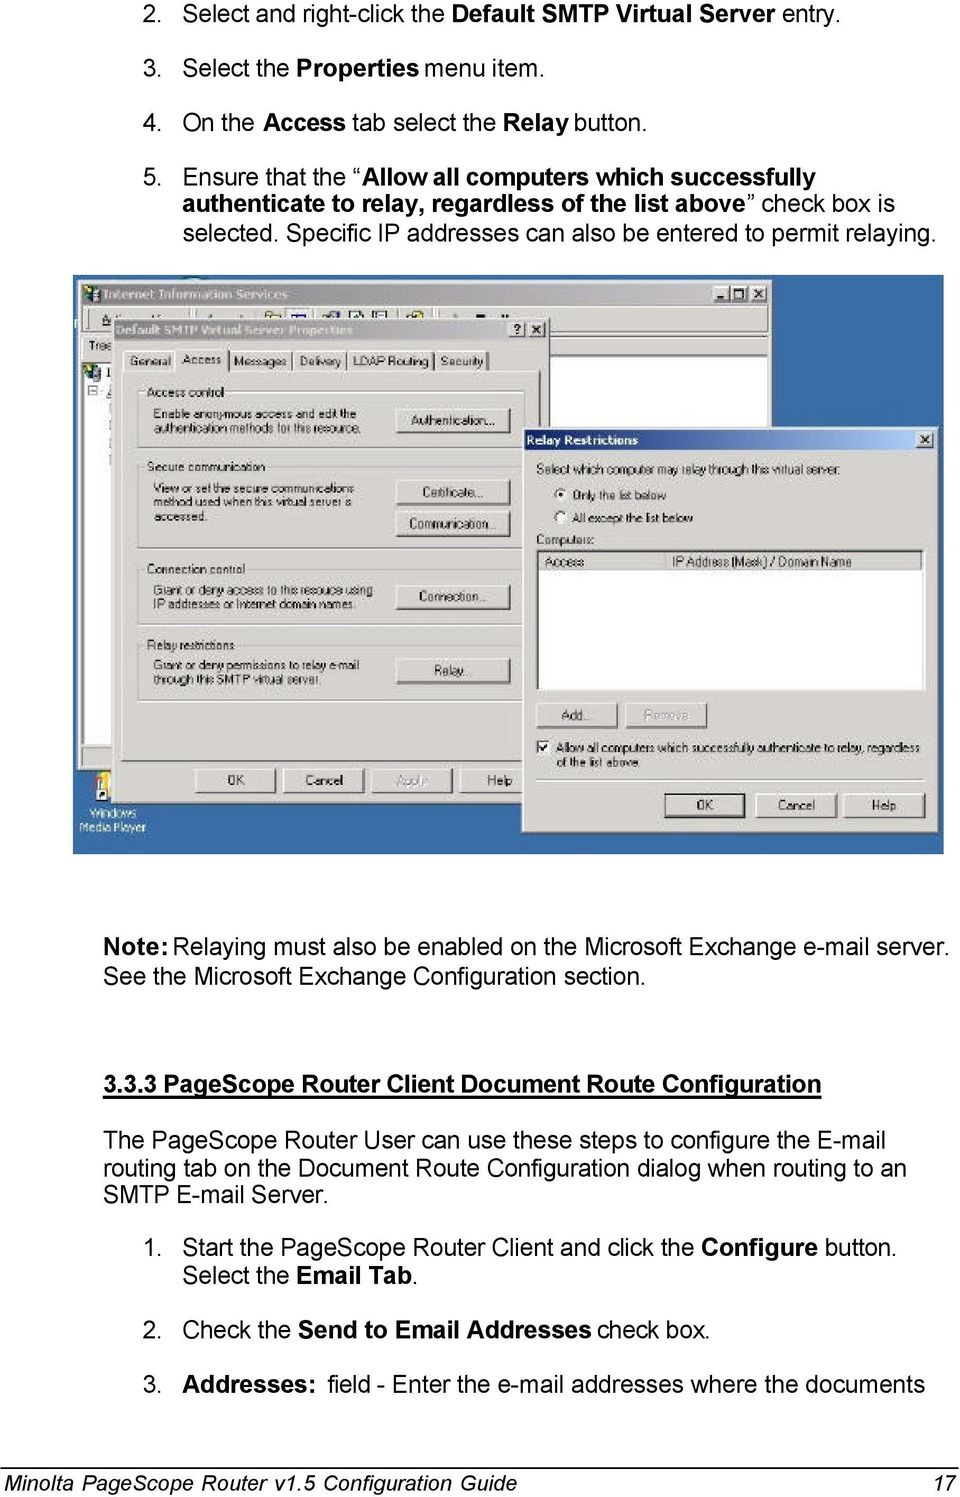 Note: Relaying must also be enabled on the Microsoft Exchange e-mail server. See the Microsoft Exchange Configuration section. 3.